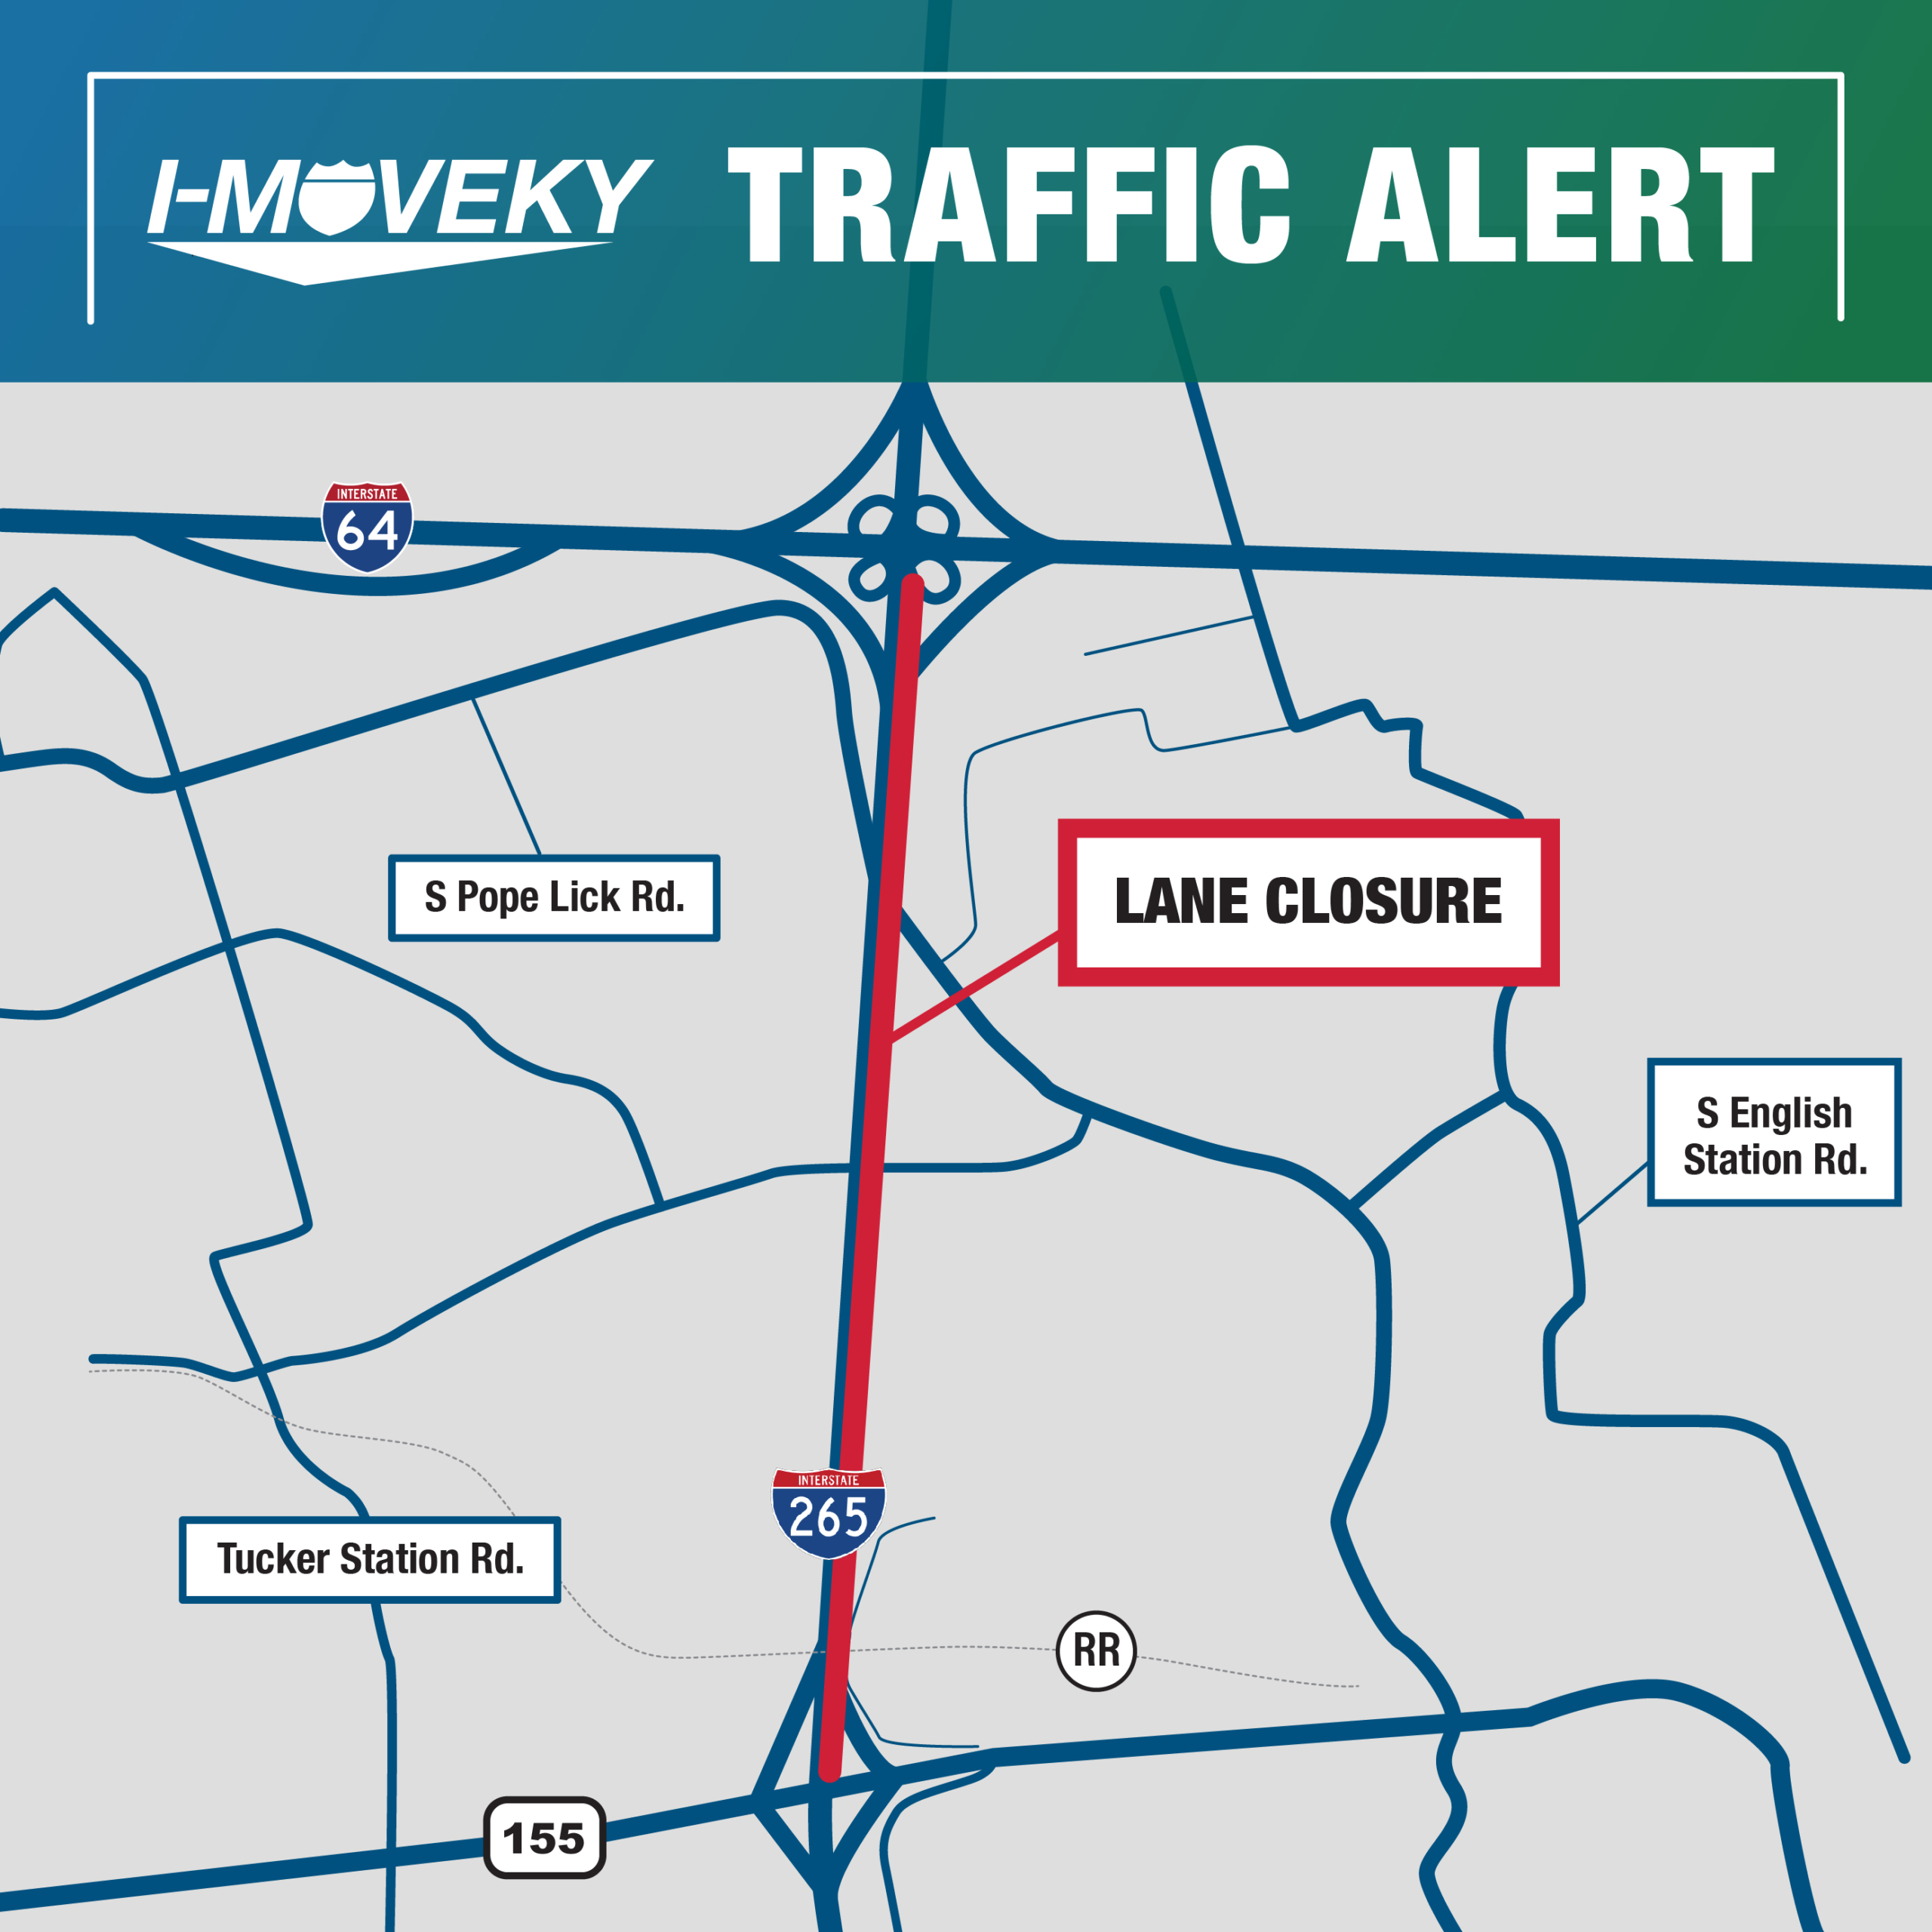 Gray I-265 map showing the northbound lane closure in red.